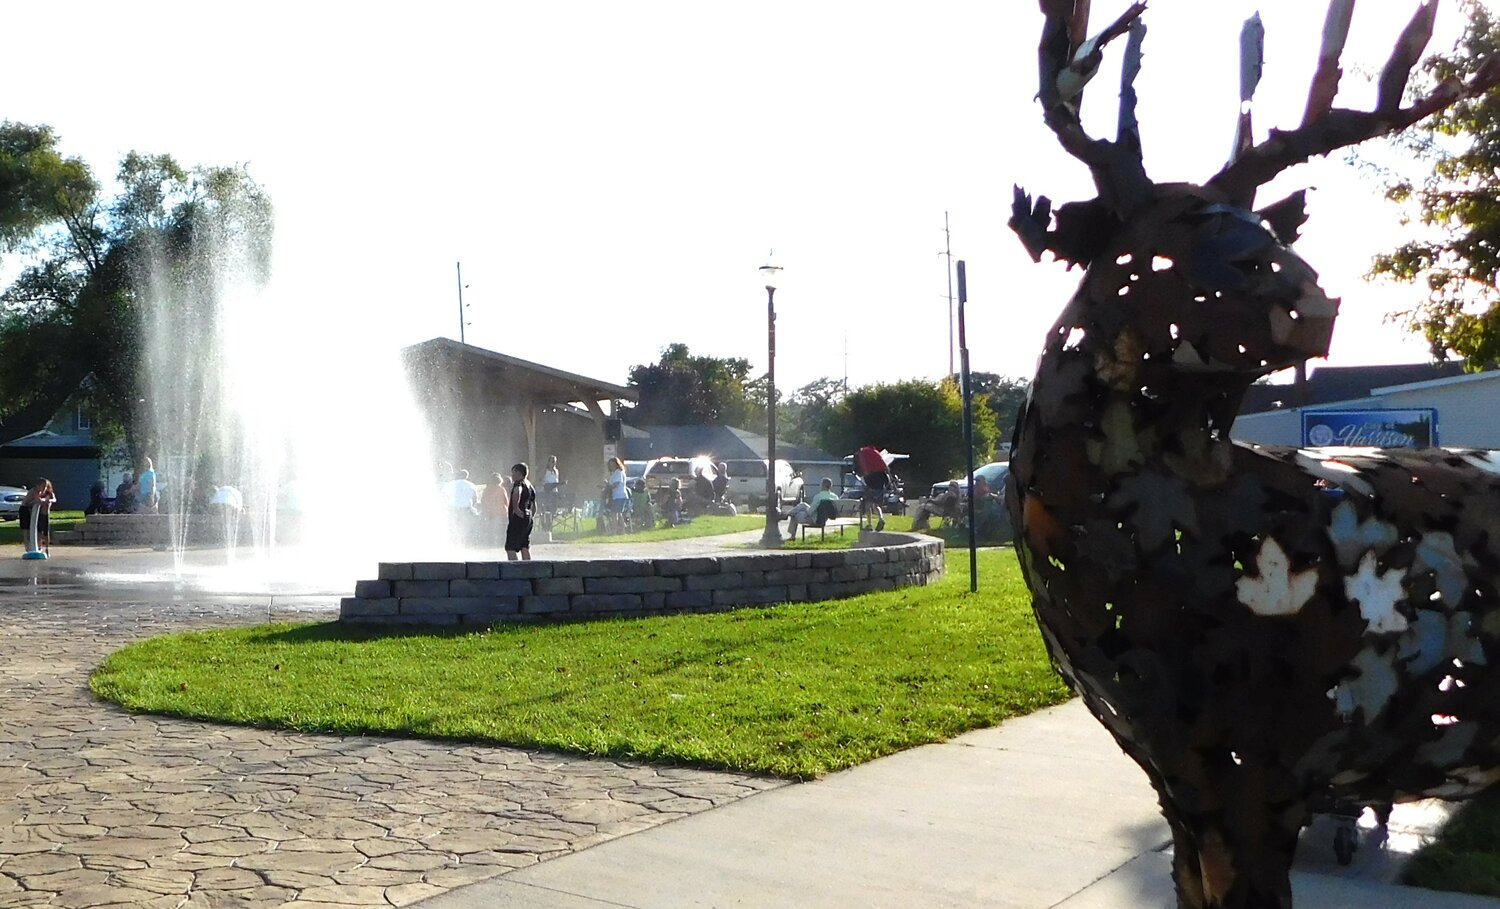 As always, kids make the most of the splash pad while the grups enjoy the Sept. 1 Friday Night Delight concert.